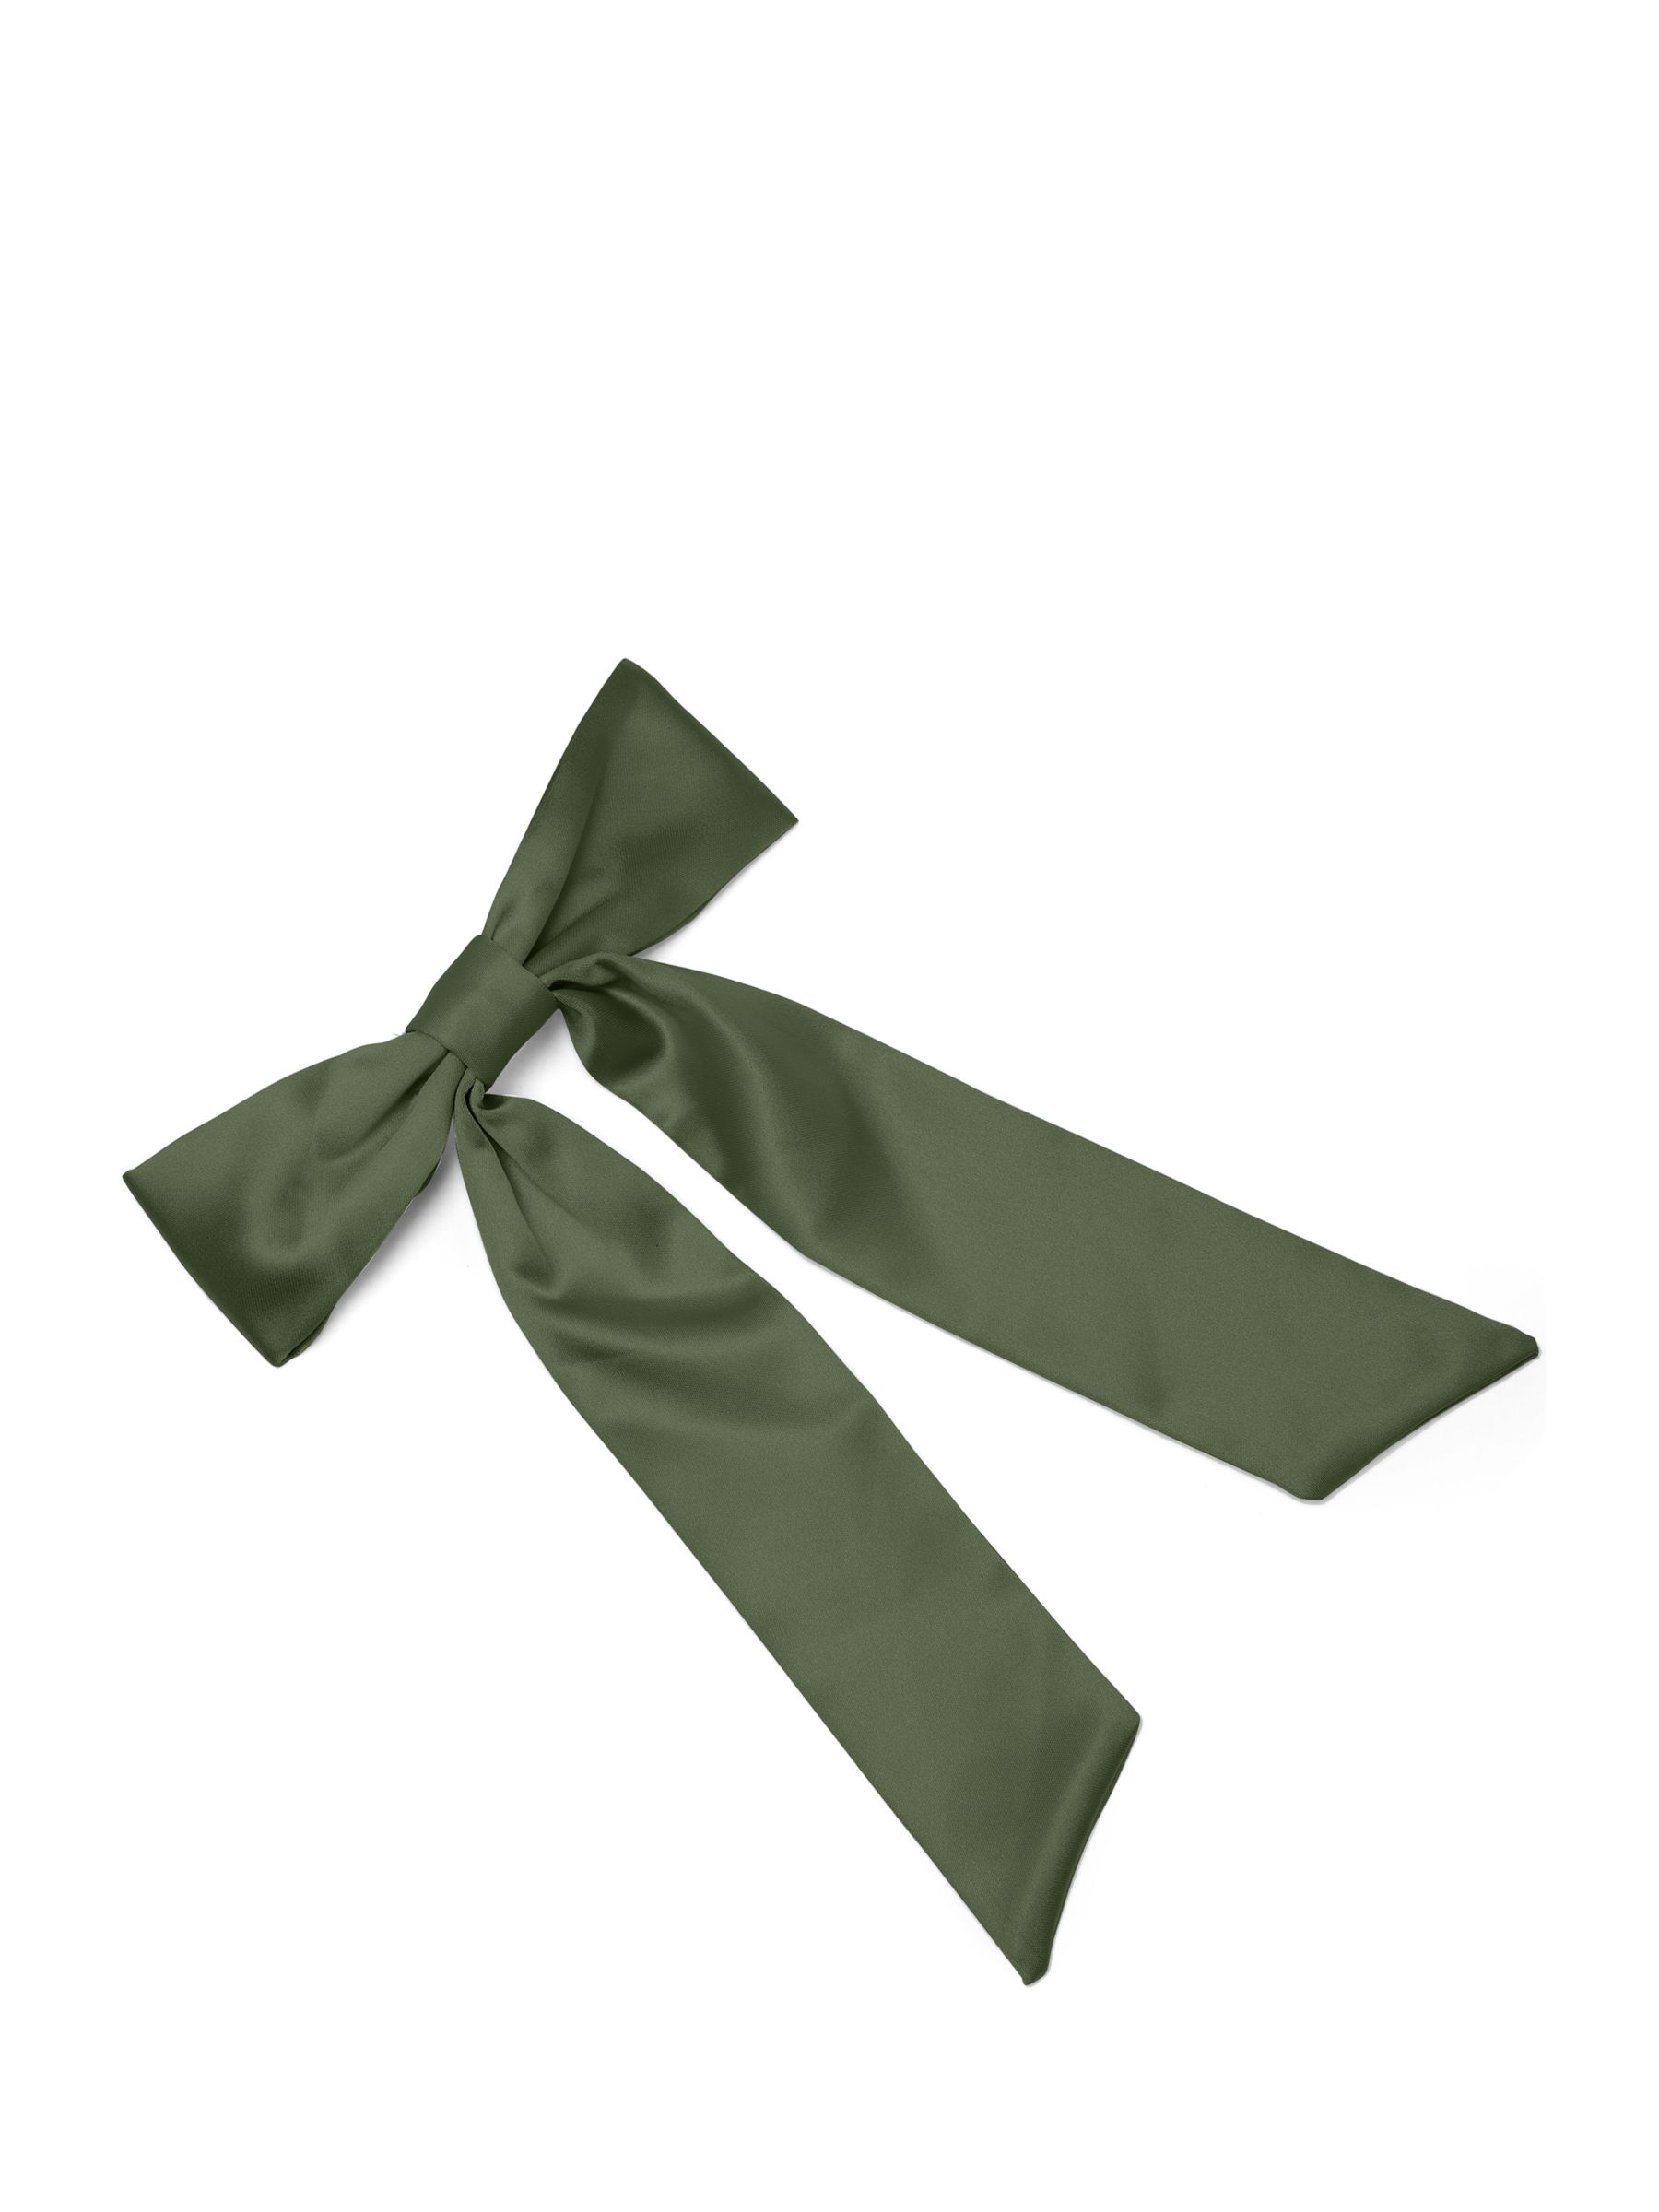 Rewritten Satin Hair Bow, Olive Green, One Size